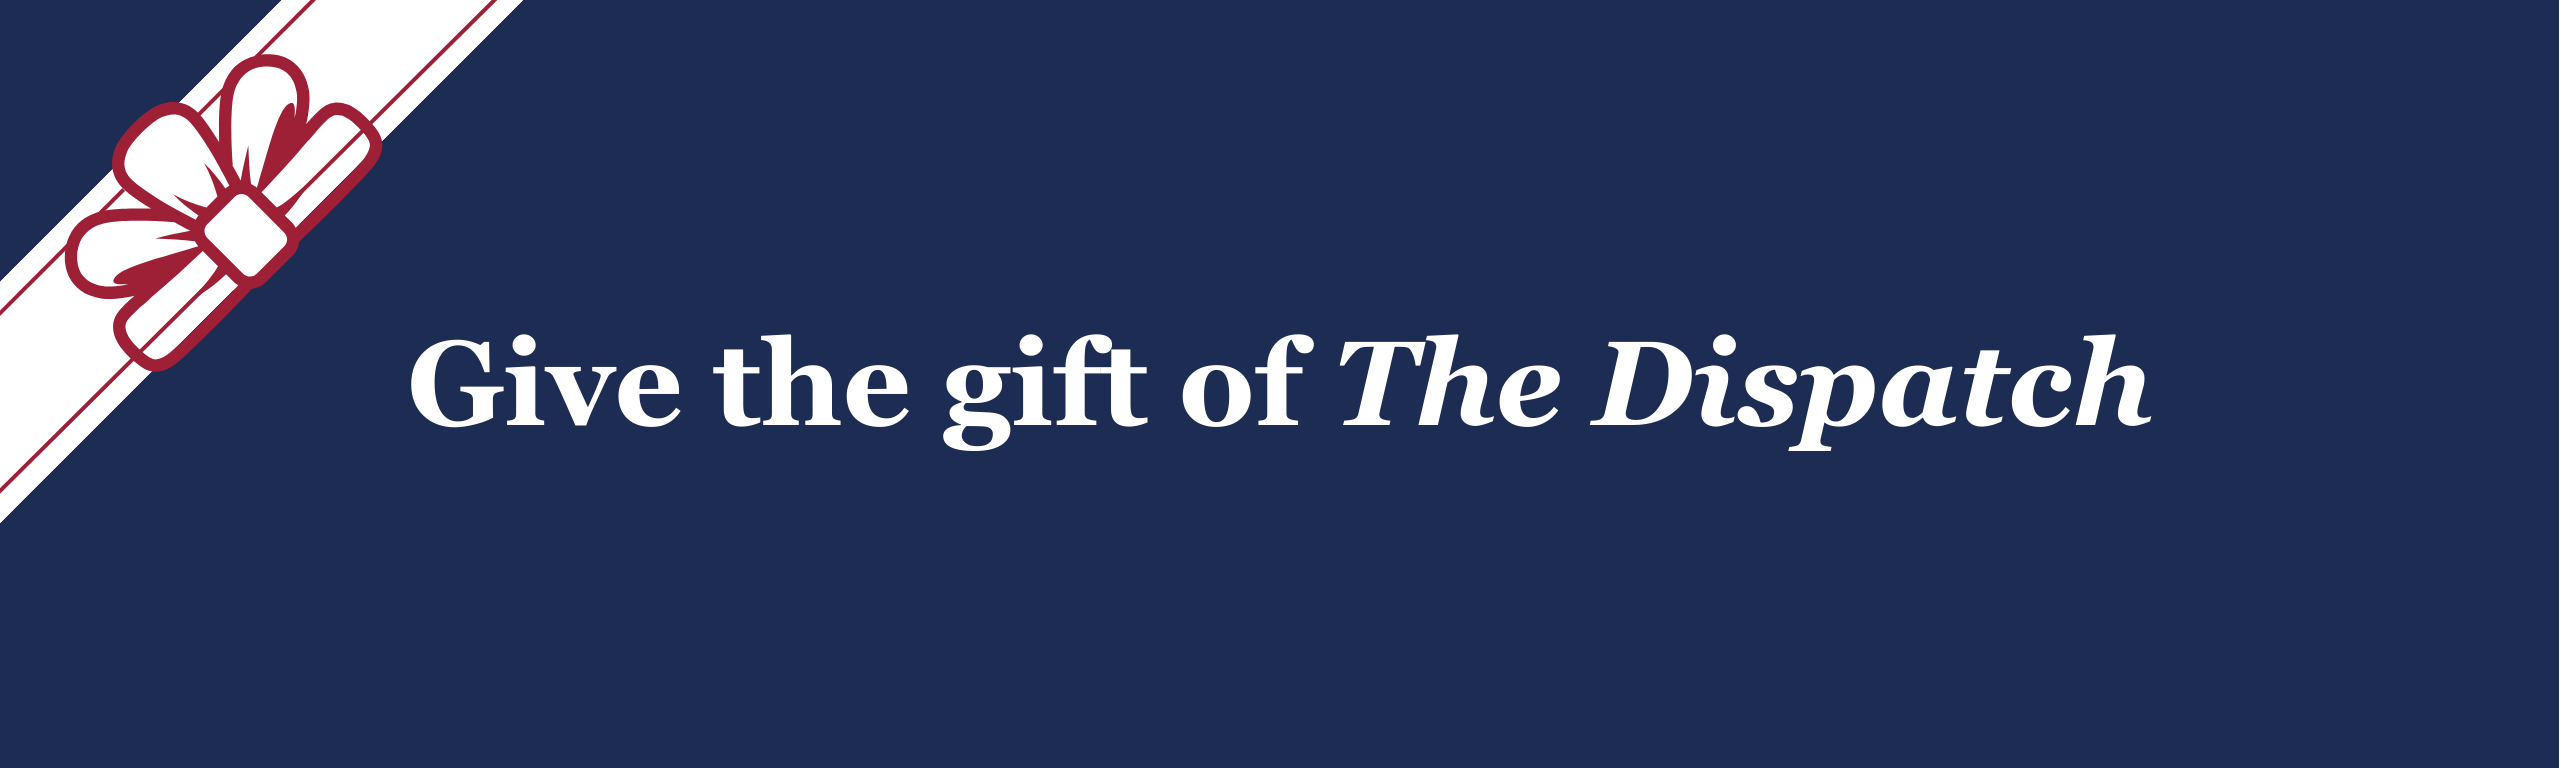 Give the gift of The Dispatch (1)